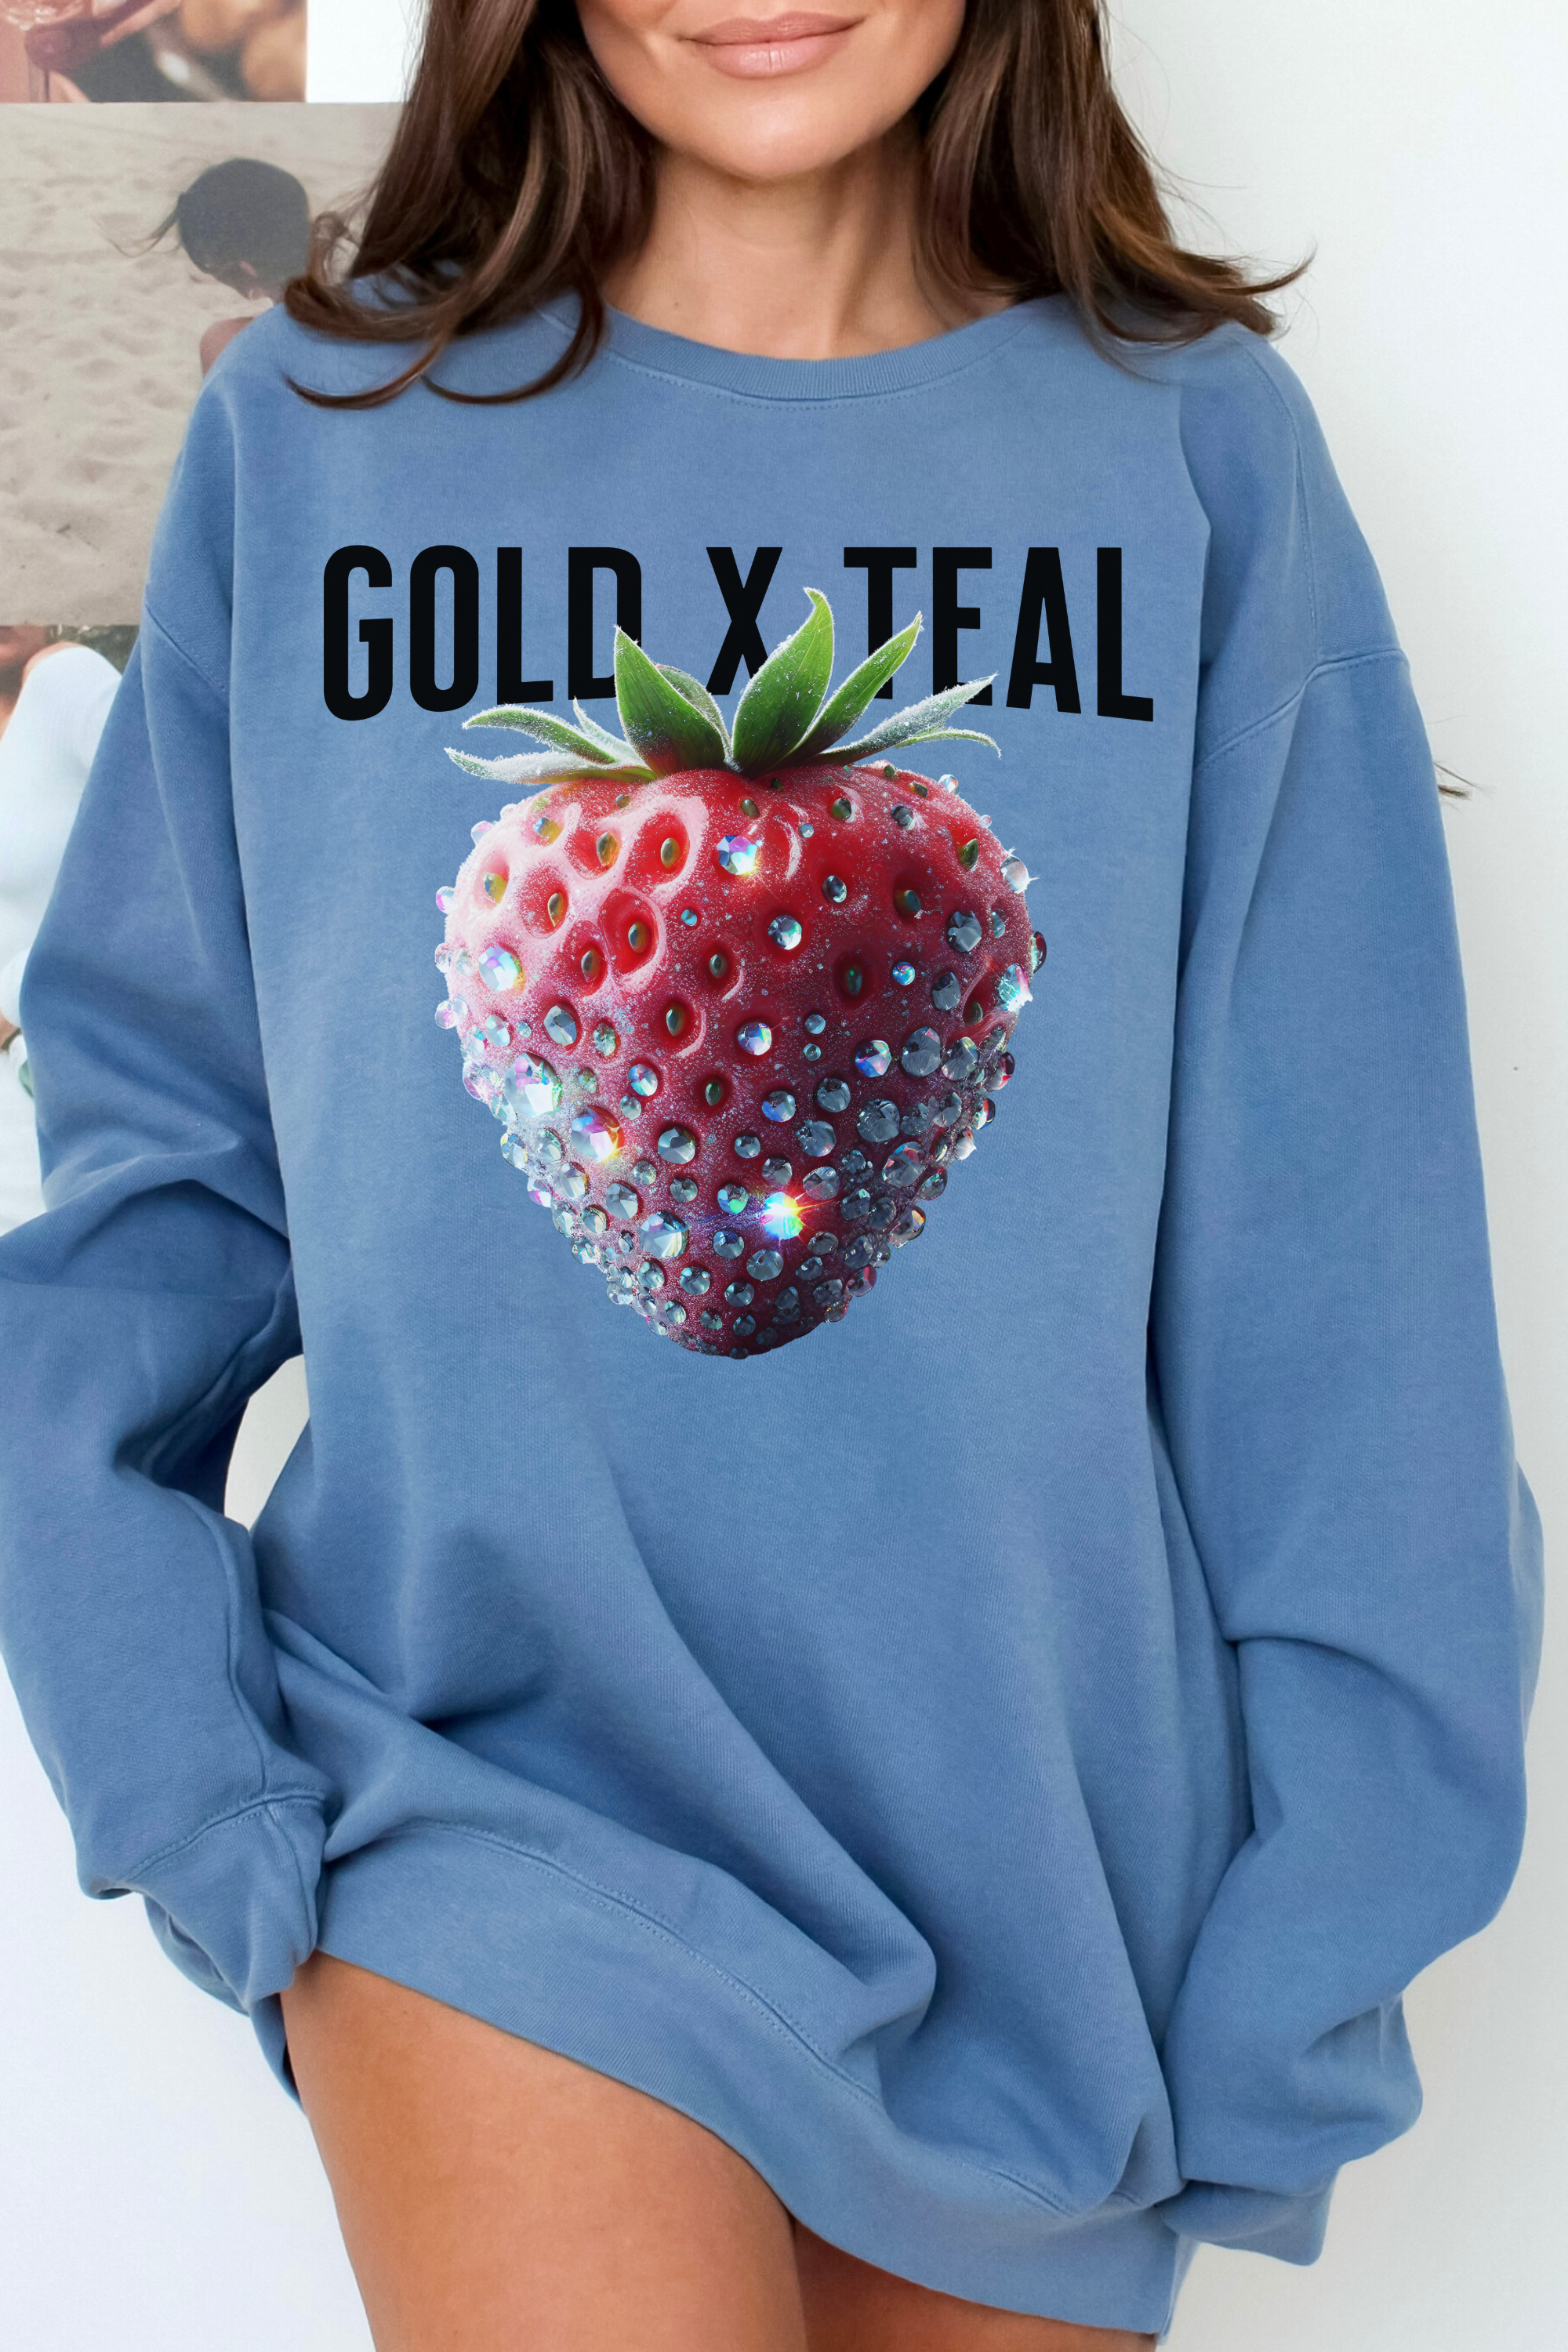 GOLDxTEAL cool strawberry graphic sweatshirt.